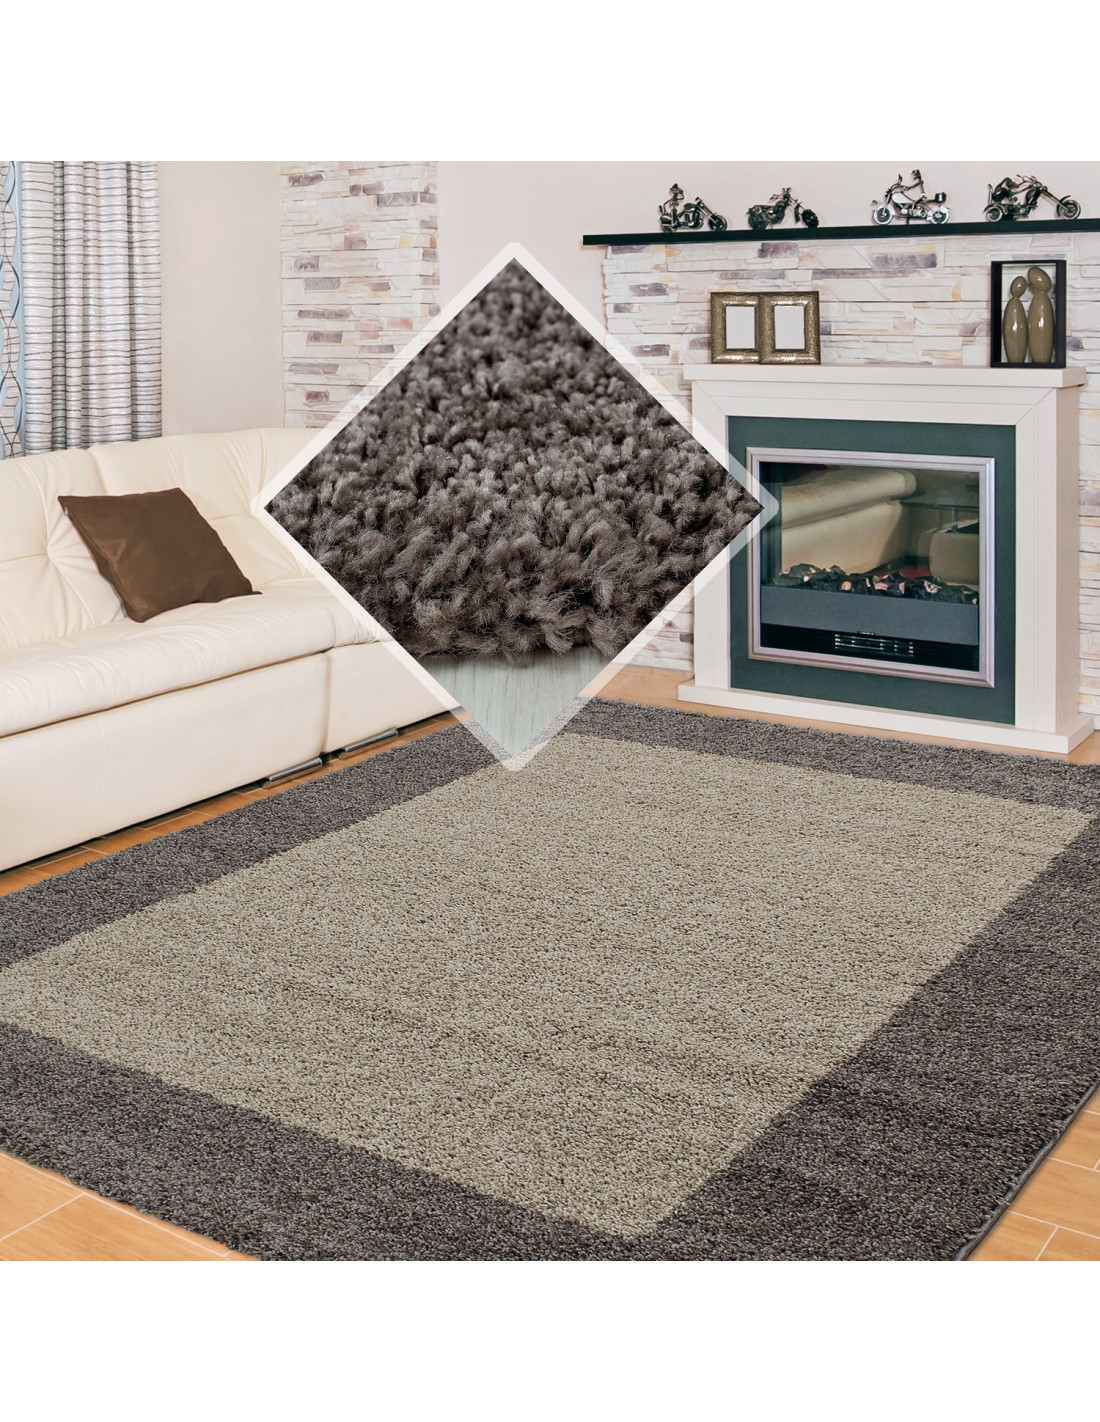 Shaggy carpet, high pile, long pile, living room shaggy, pile height 3cm, taupe mocca